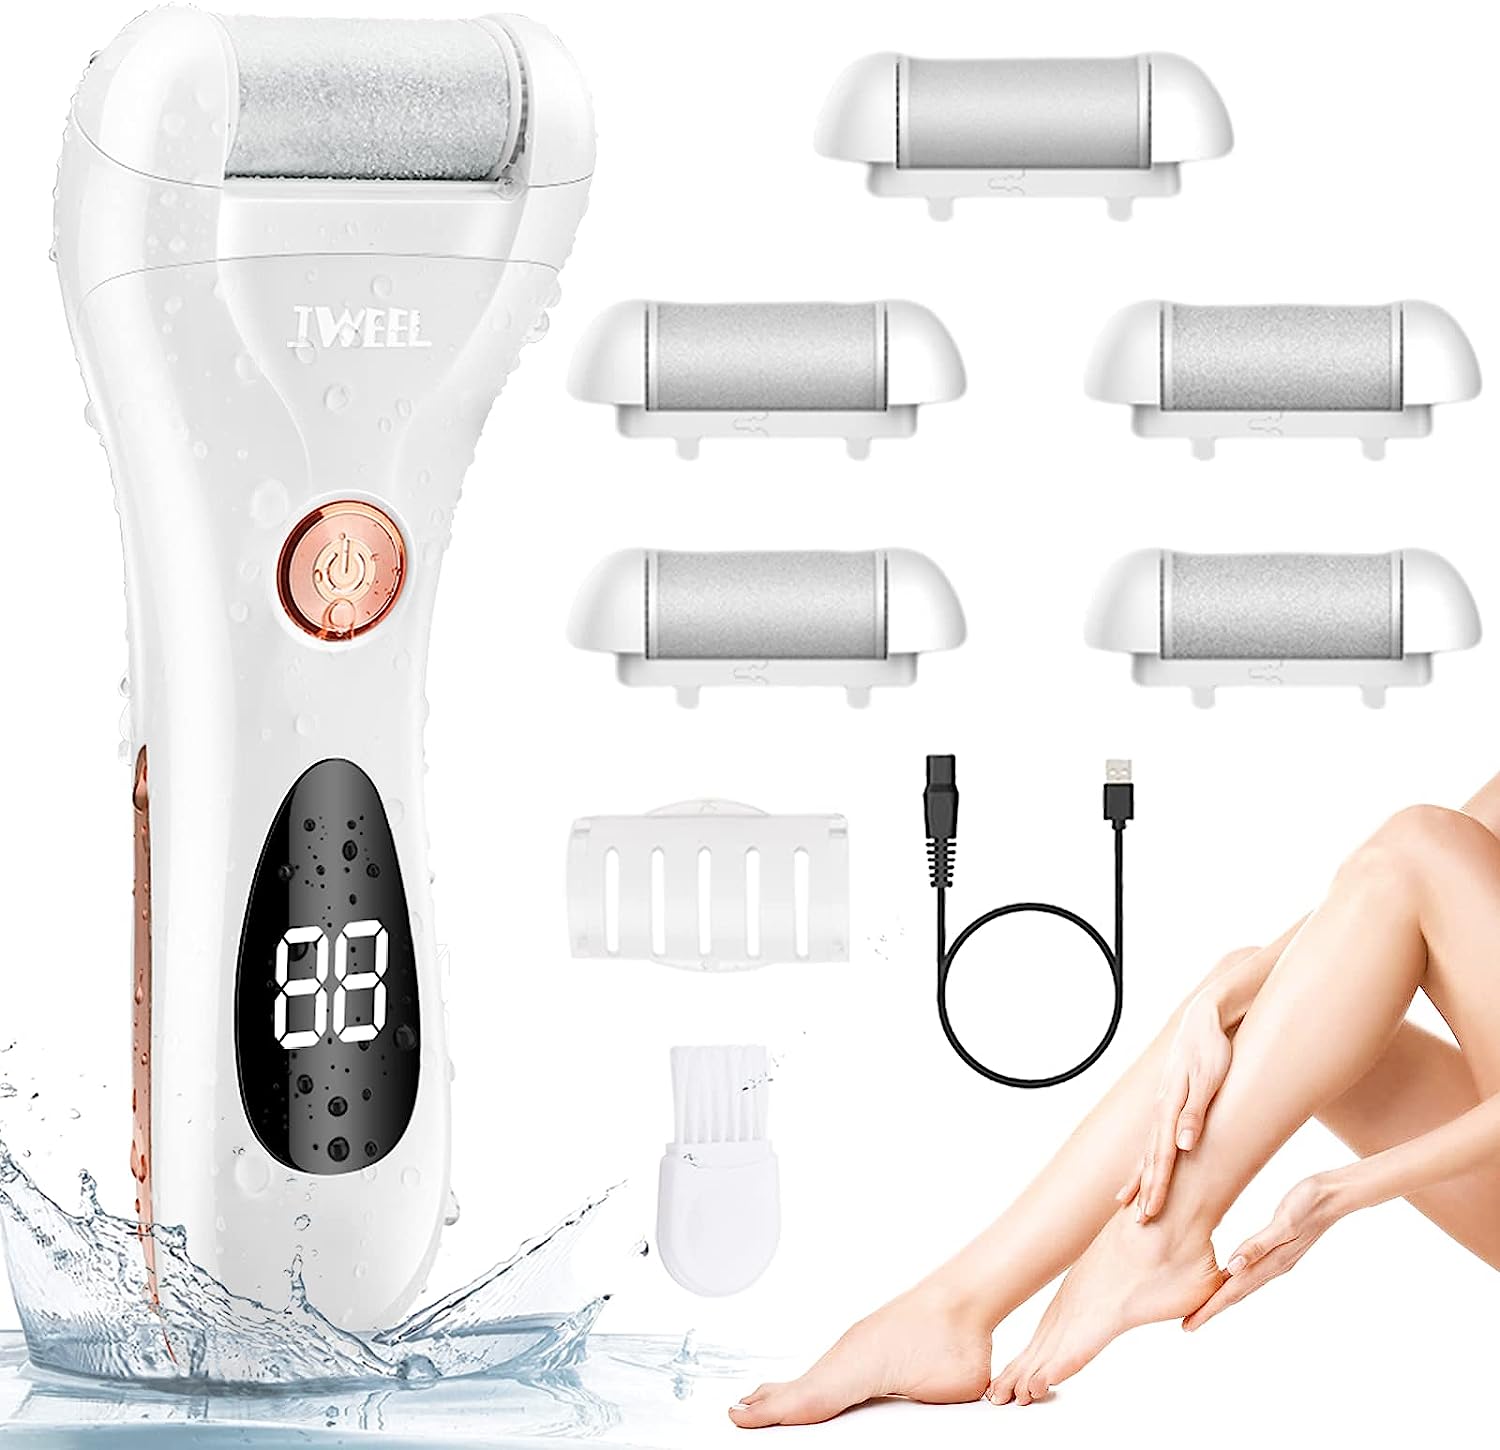 SHREE HANS CREATION Rechargeable Pedicure For Callus